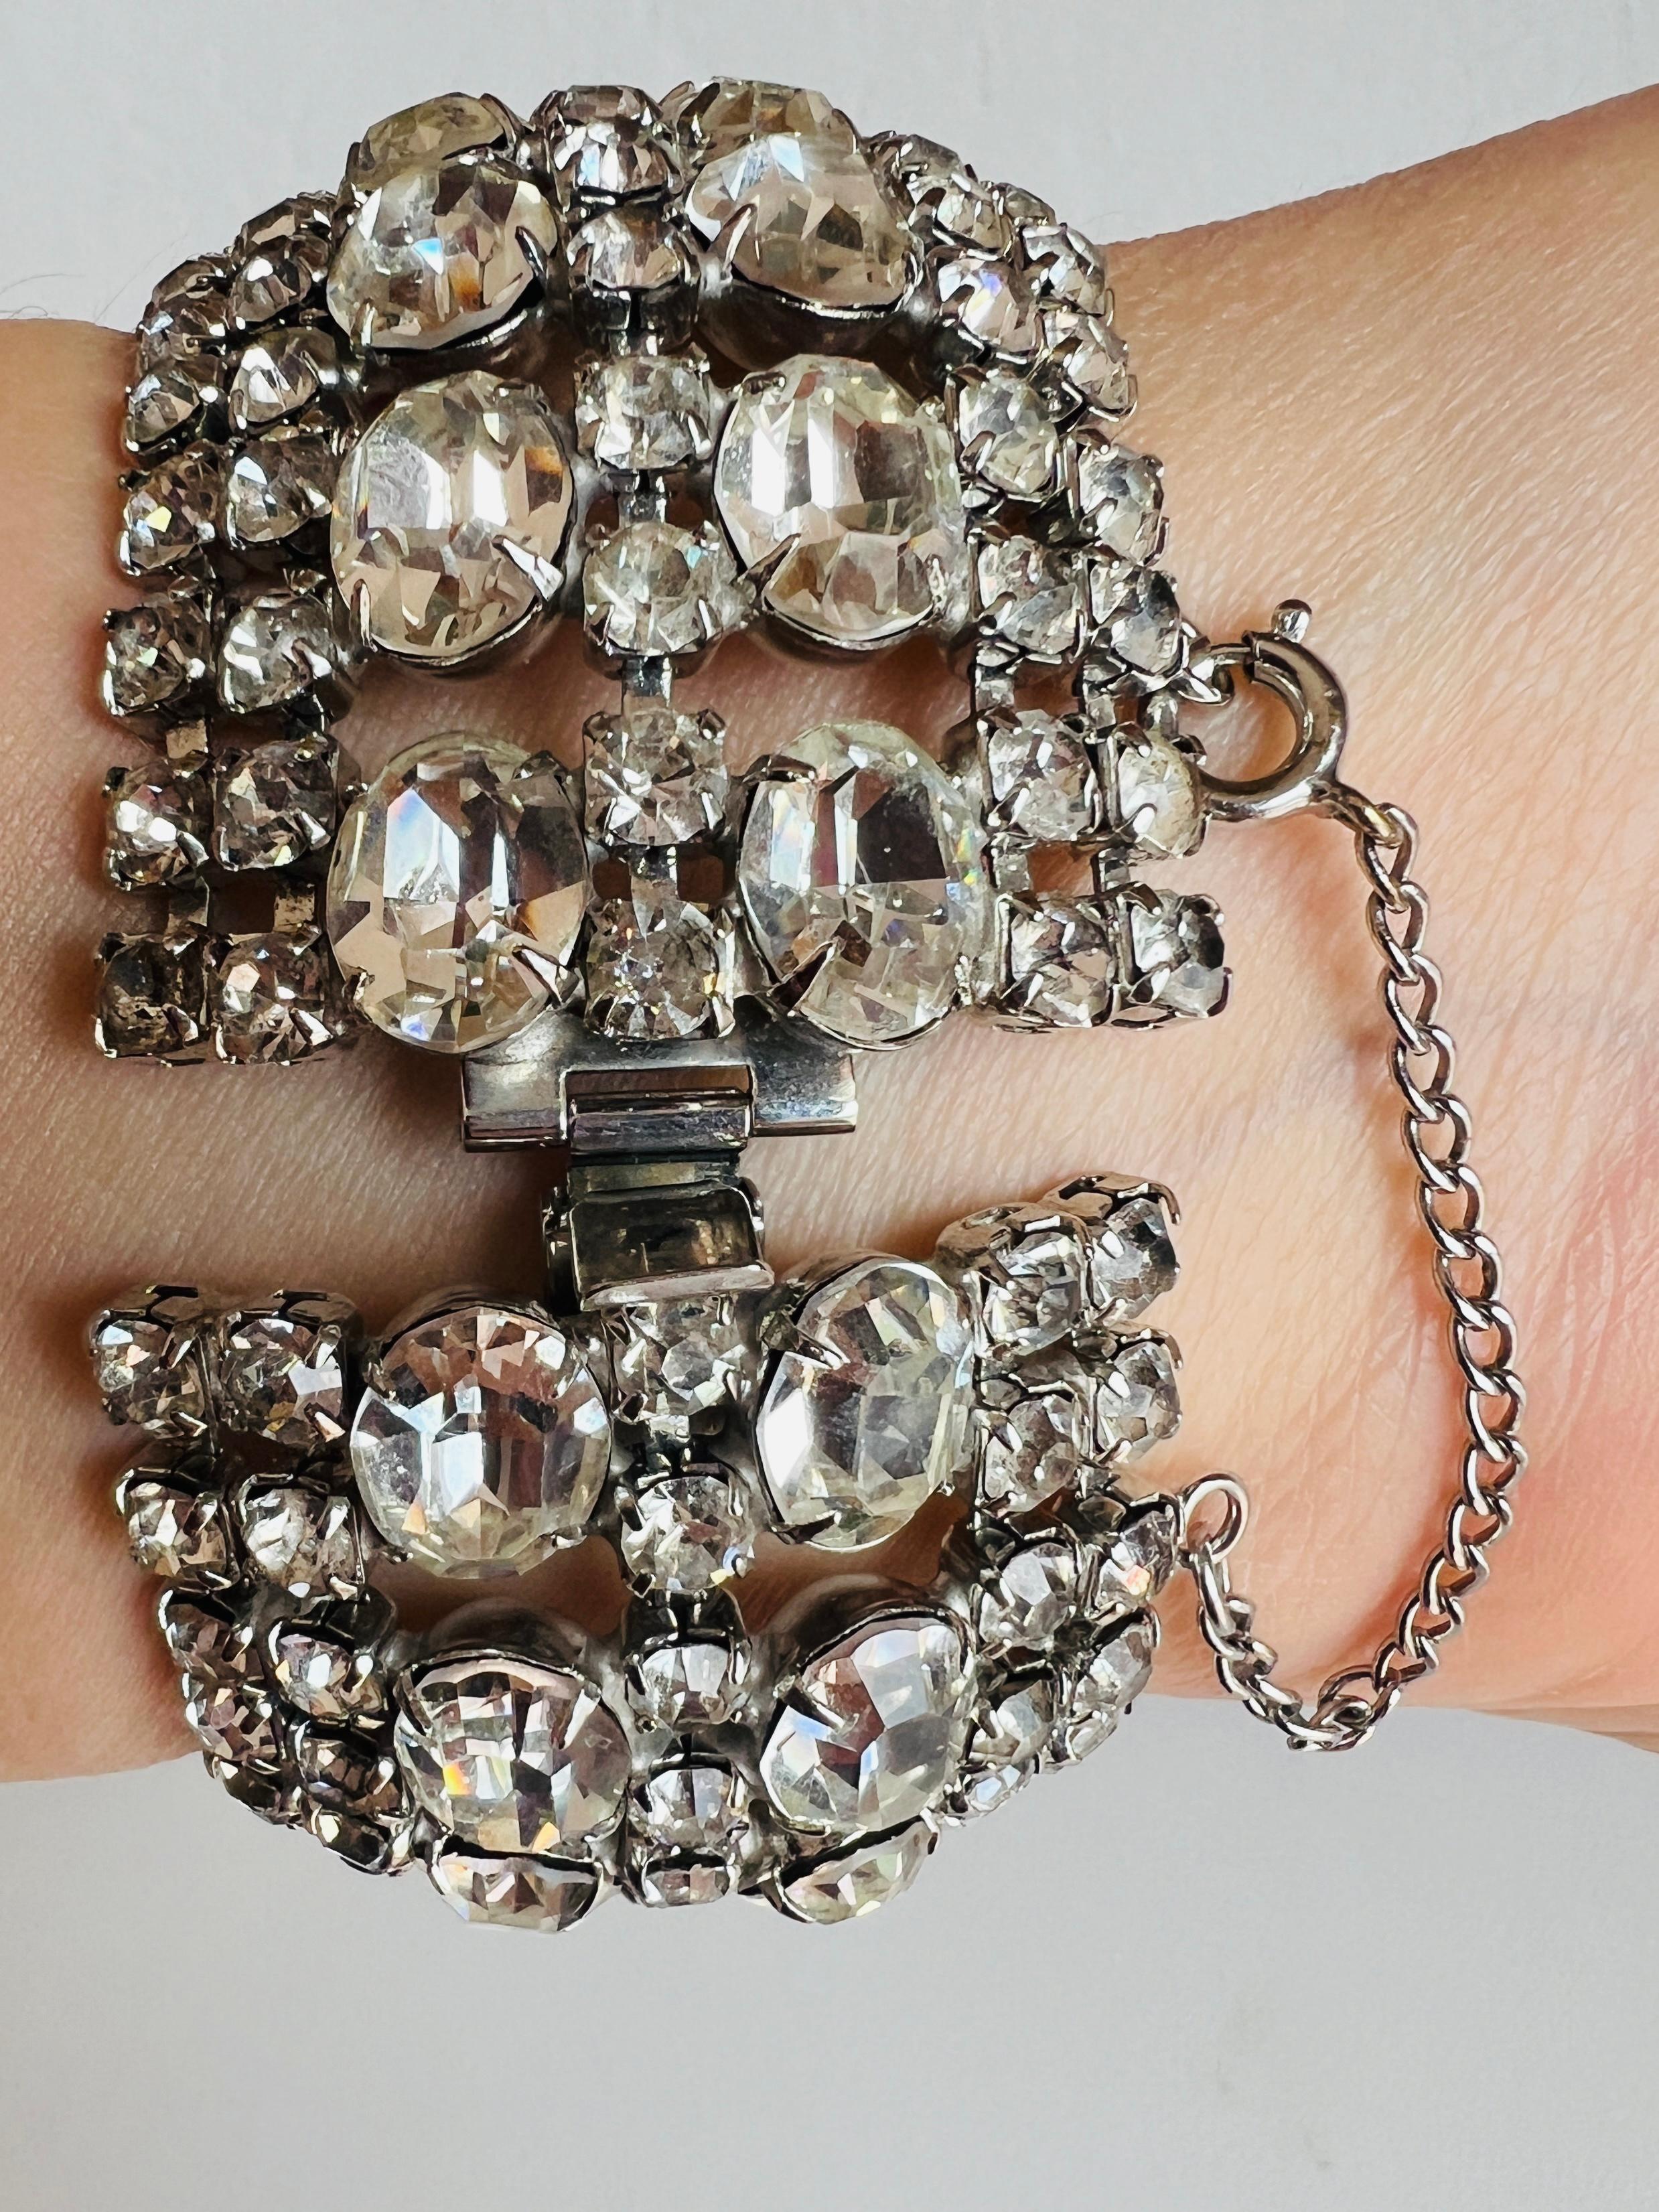 Vintage 7 Rows Wide Rhinestone Silver Tone Glam Bracelet Safety Clasp For Sale 3